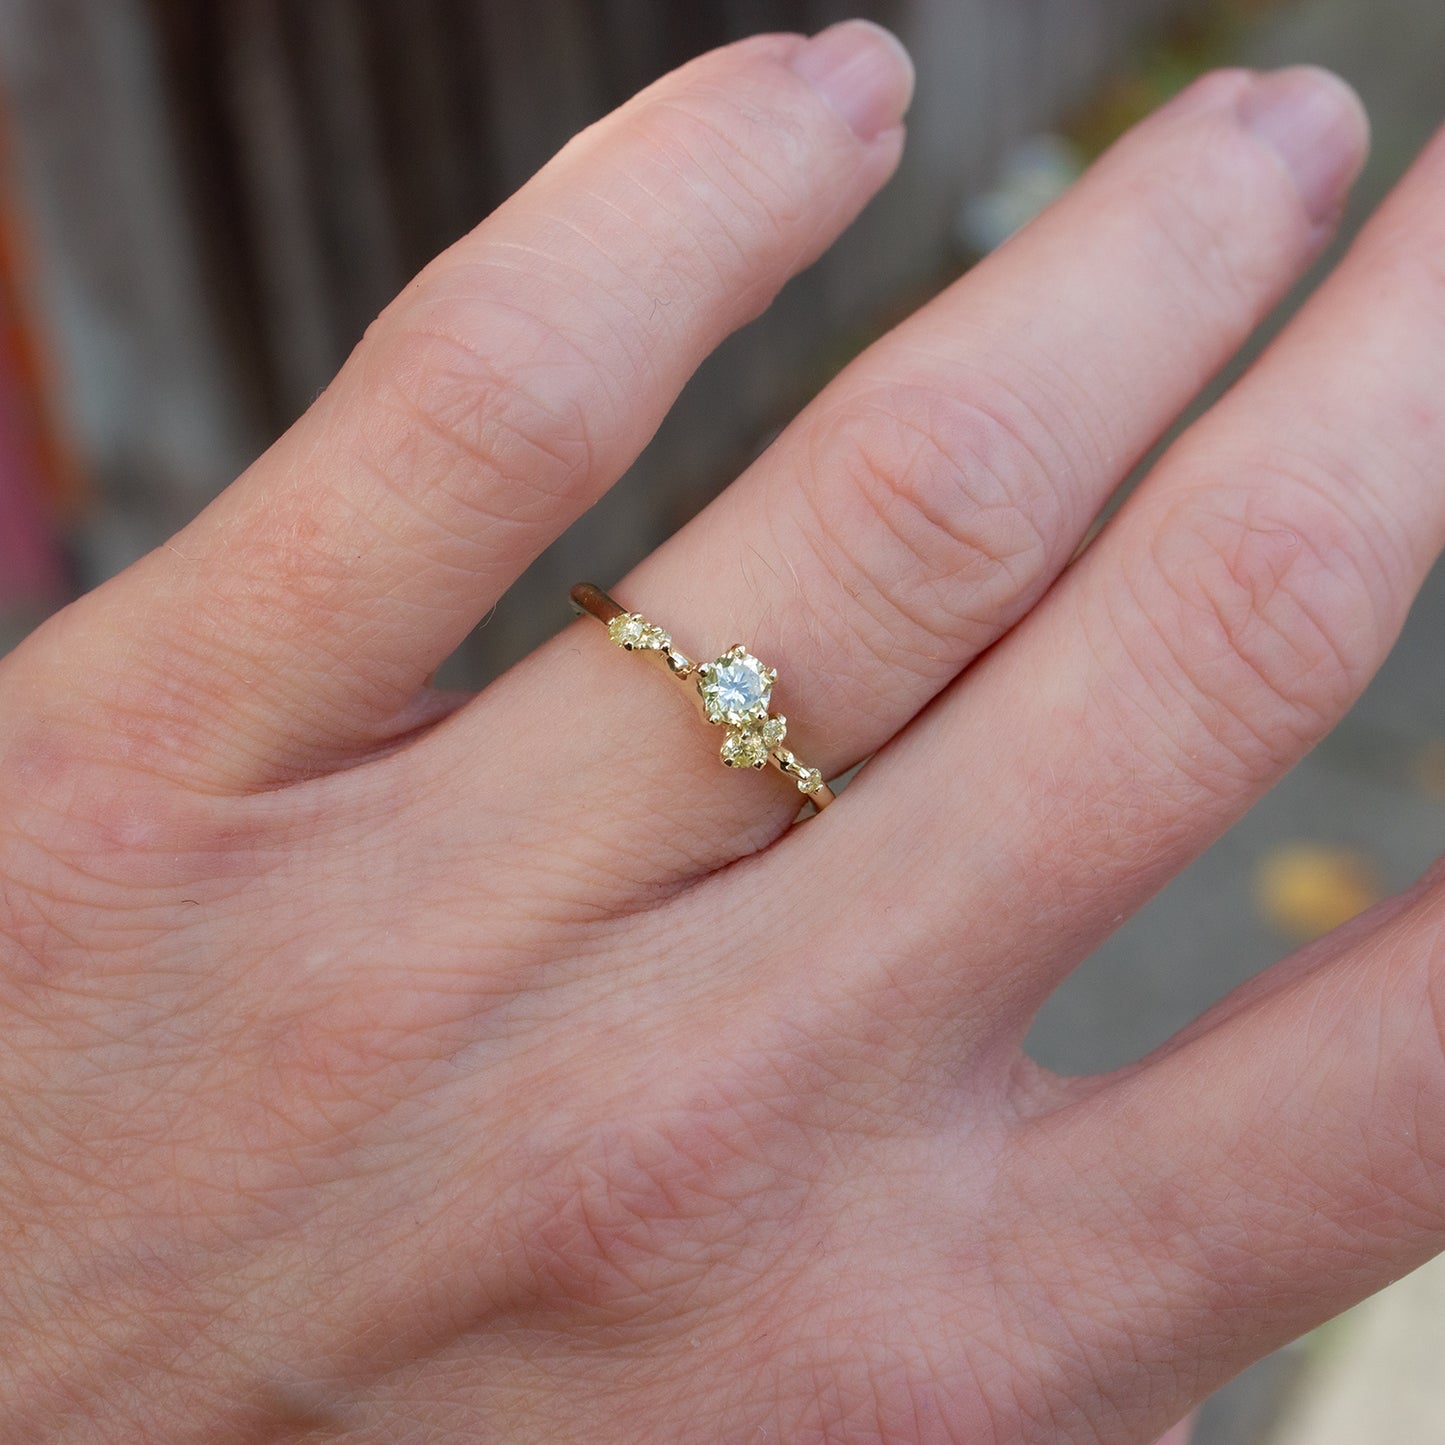 Alternative engagement ring featuring natural yellow diamonds organically scattered along the band. Ring is inspired by first flower buds.